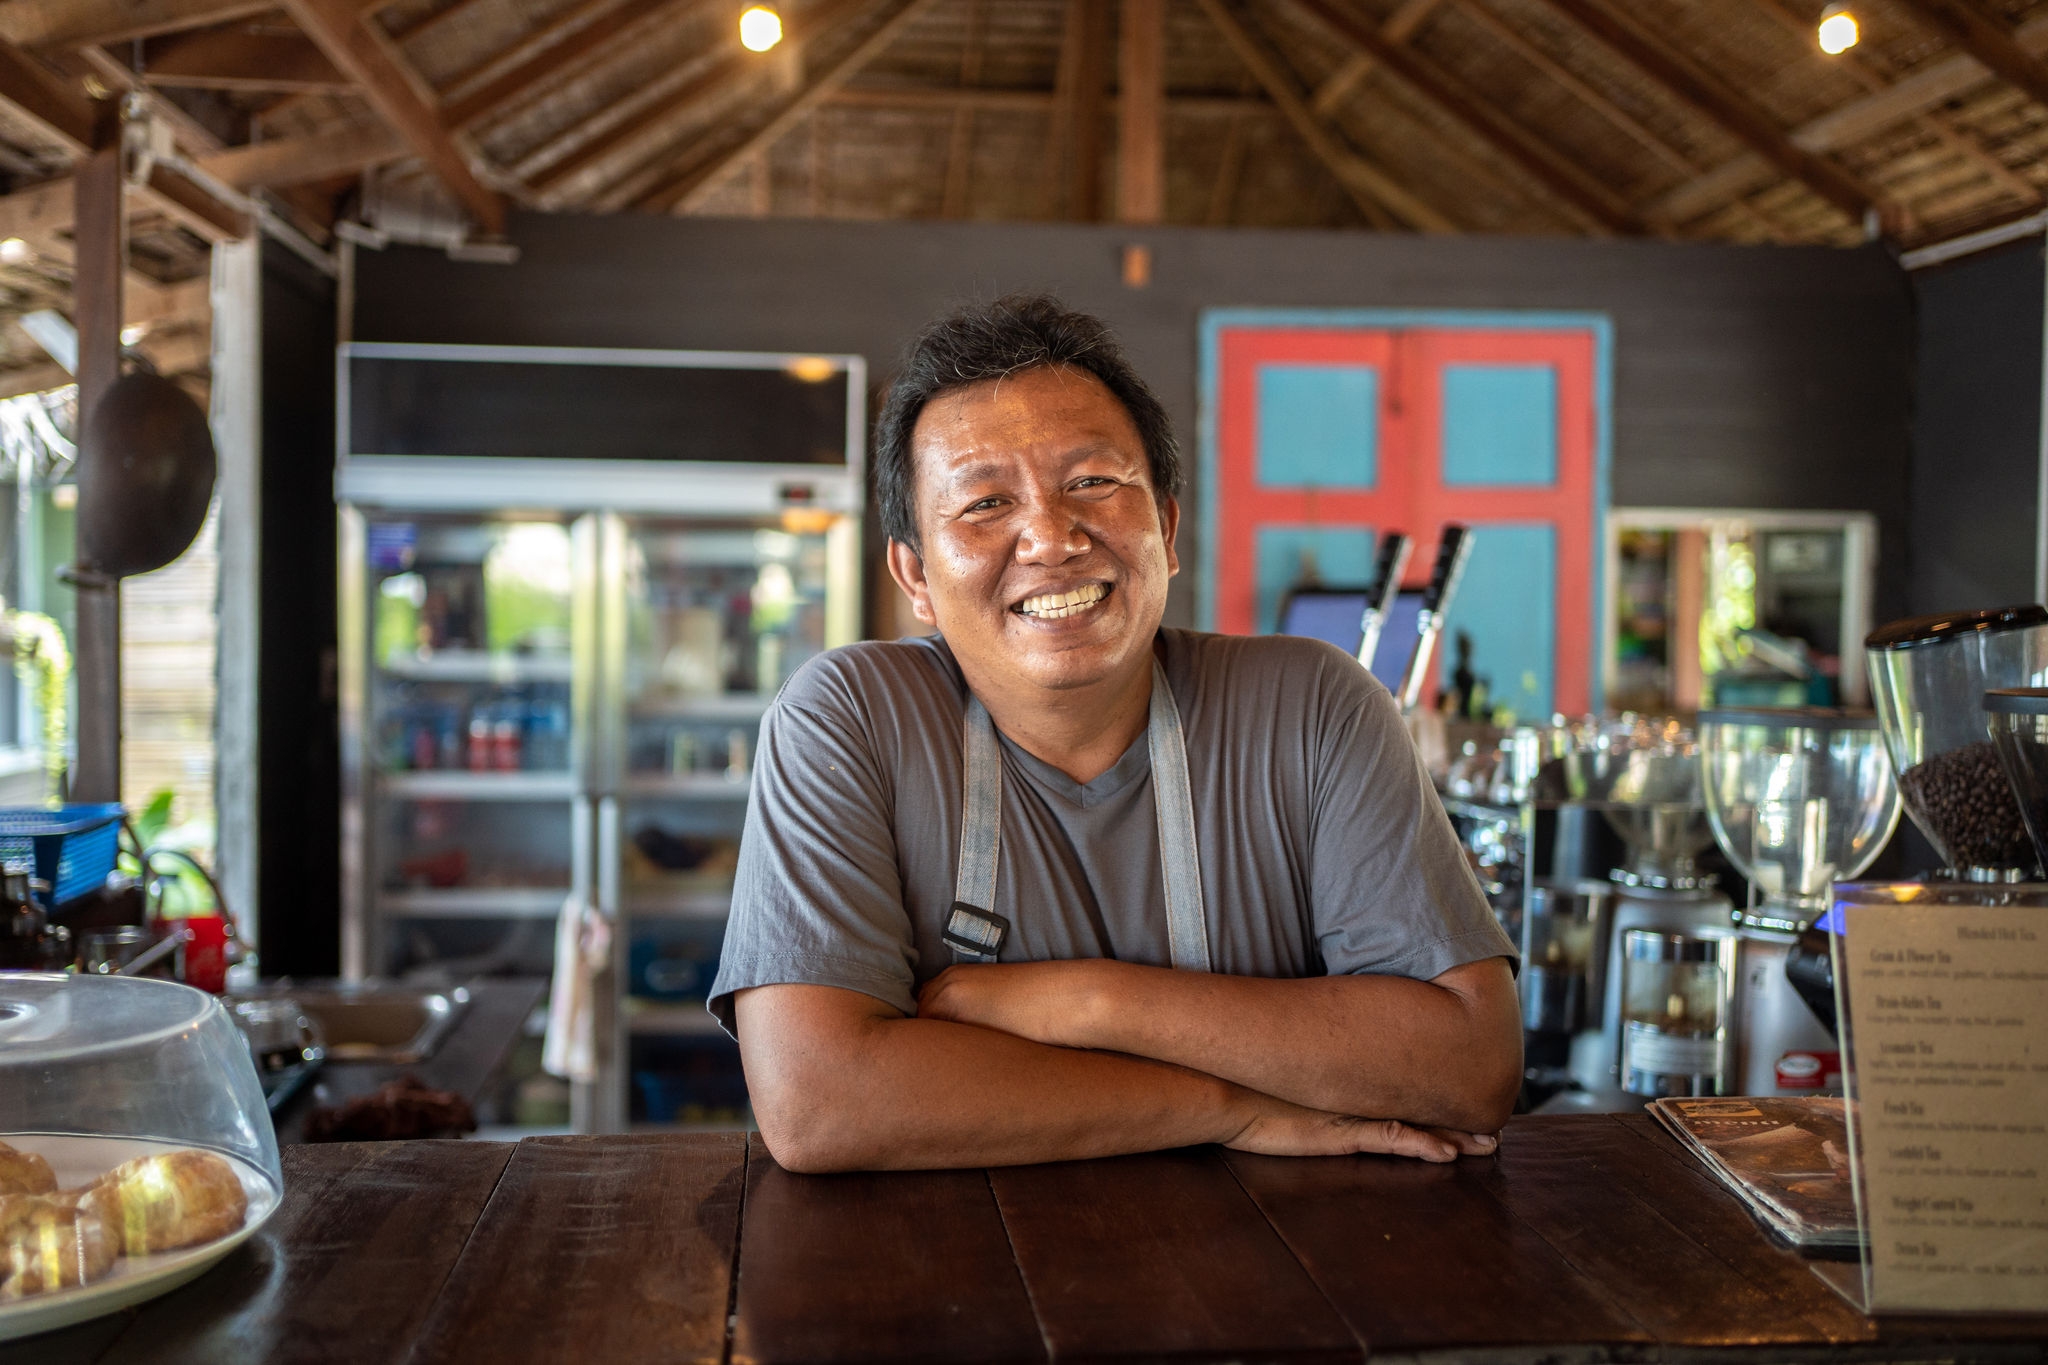 Smiling man is standing at the bar counter and looking at camera in a coffee shop.